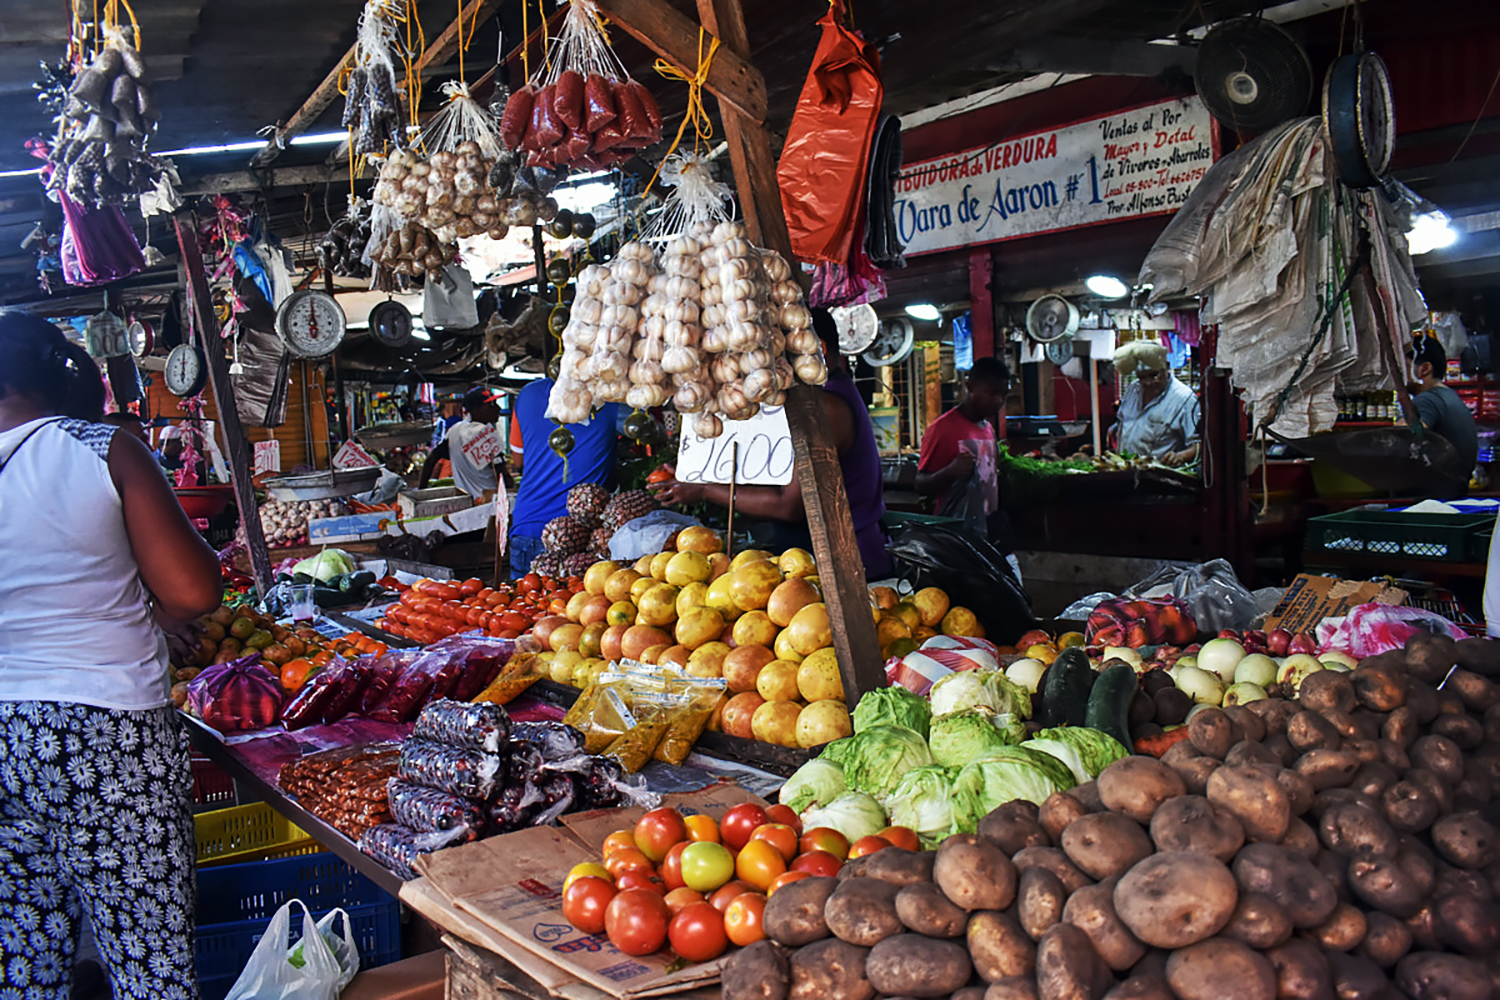 a street market, with garlic hanging, stacks of fruits and vegetables